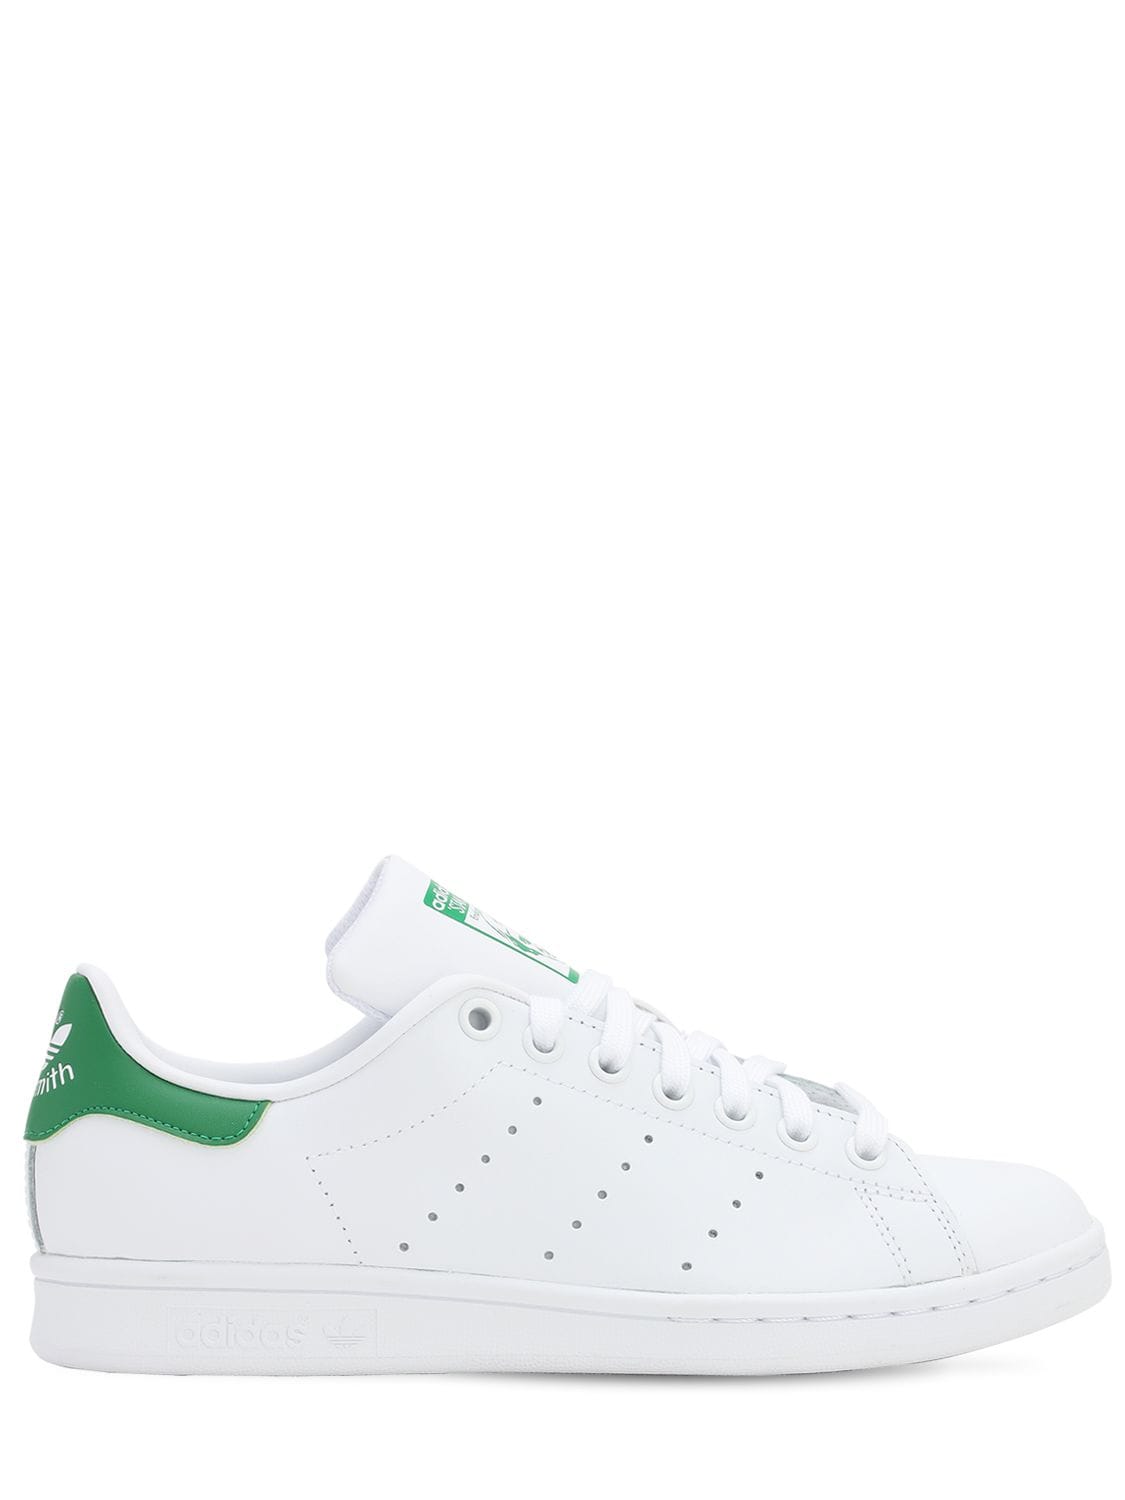 ADIDAS ORIGINALS STAN SMITH LEATHER trainers,70IWAN009-V0HJVEU1